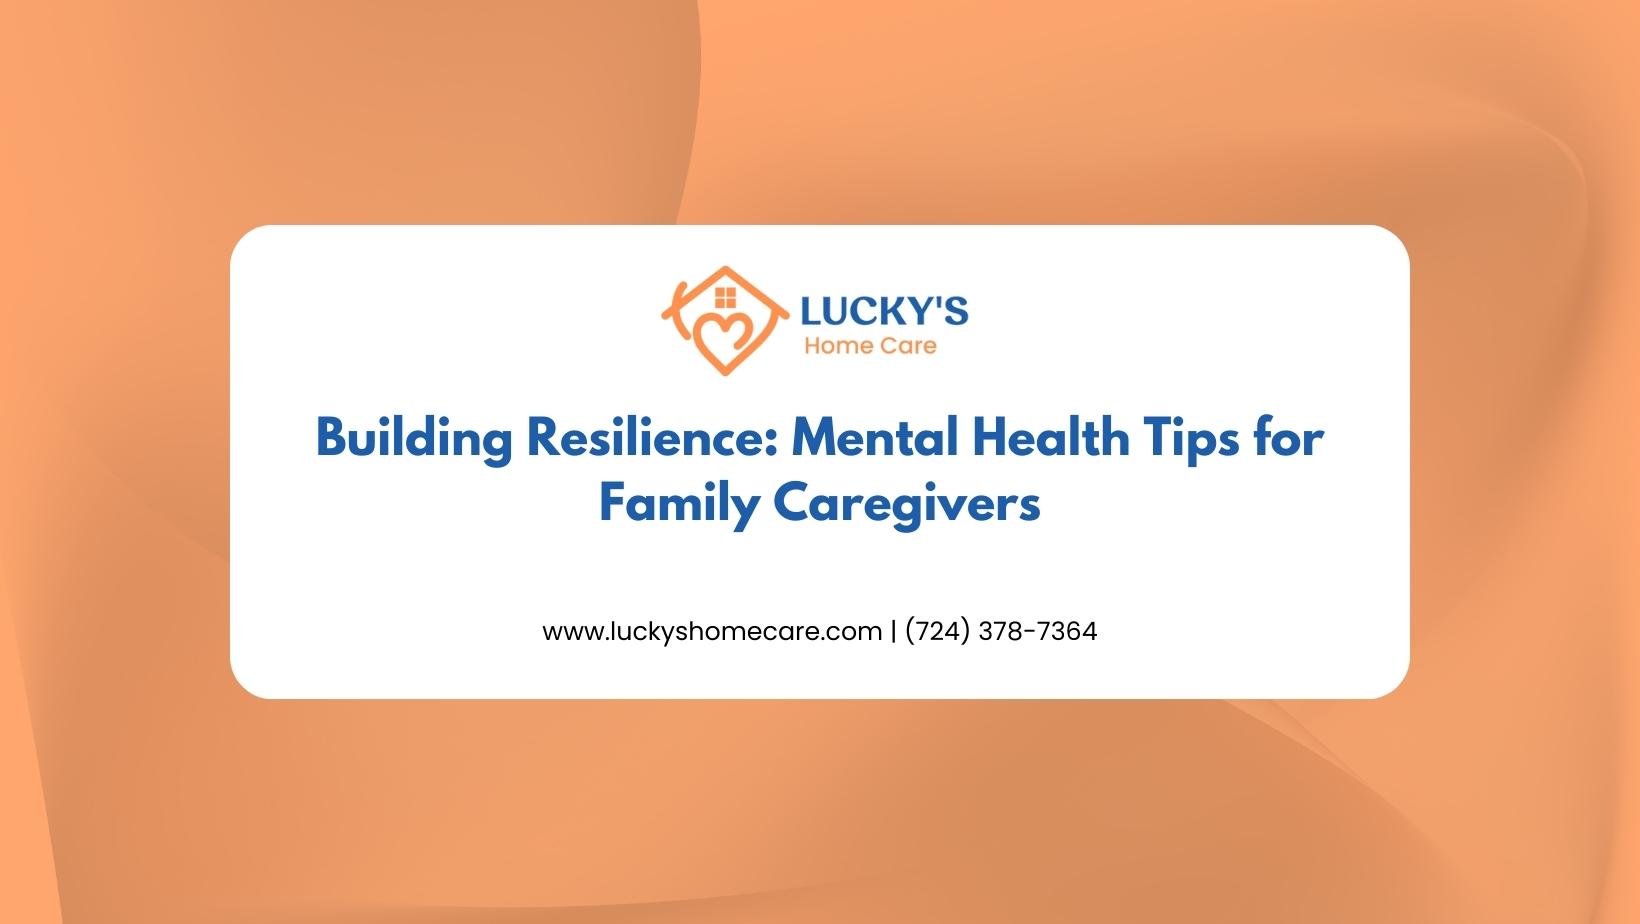 Building Resilience- Mental Health Tips for Family Caregivers